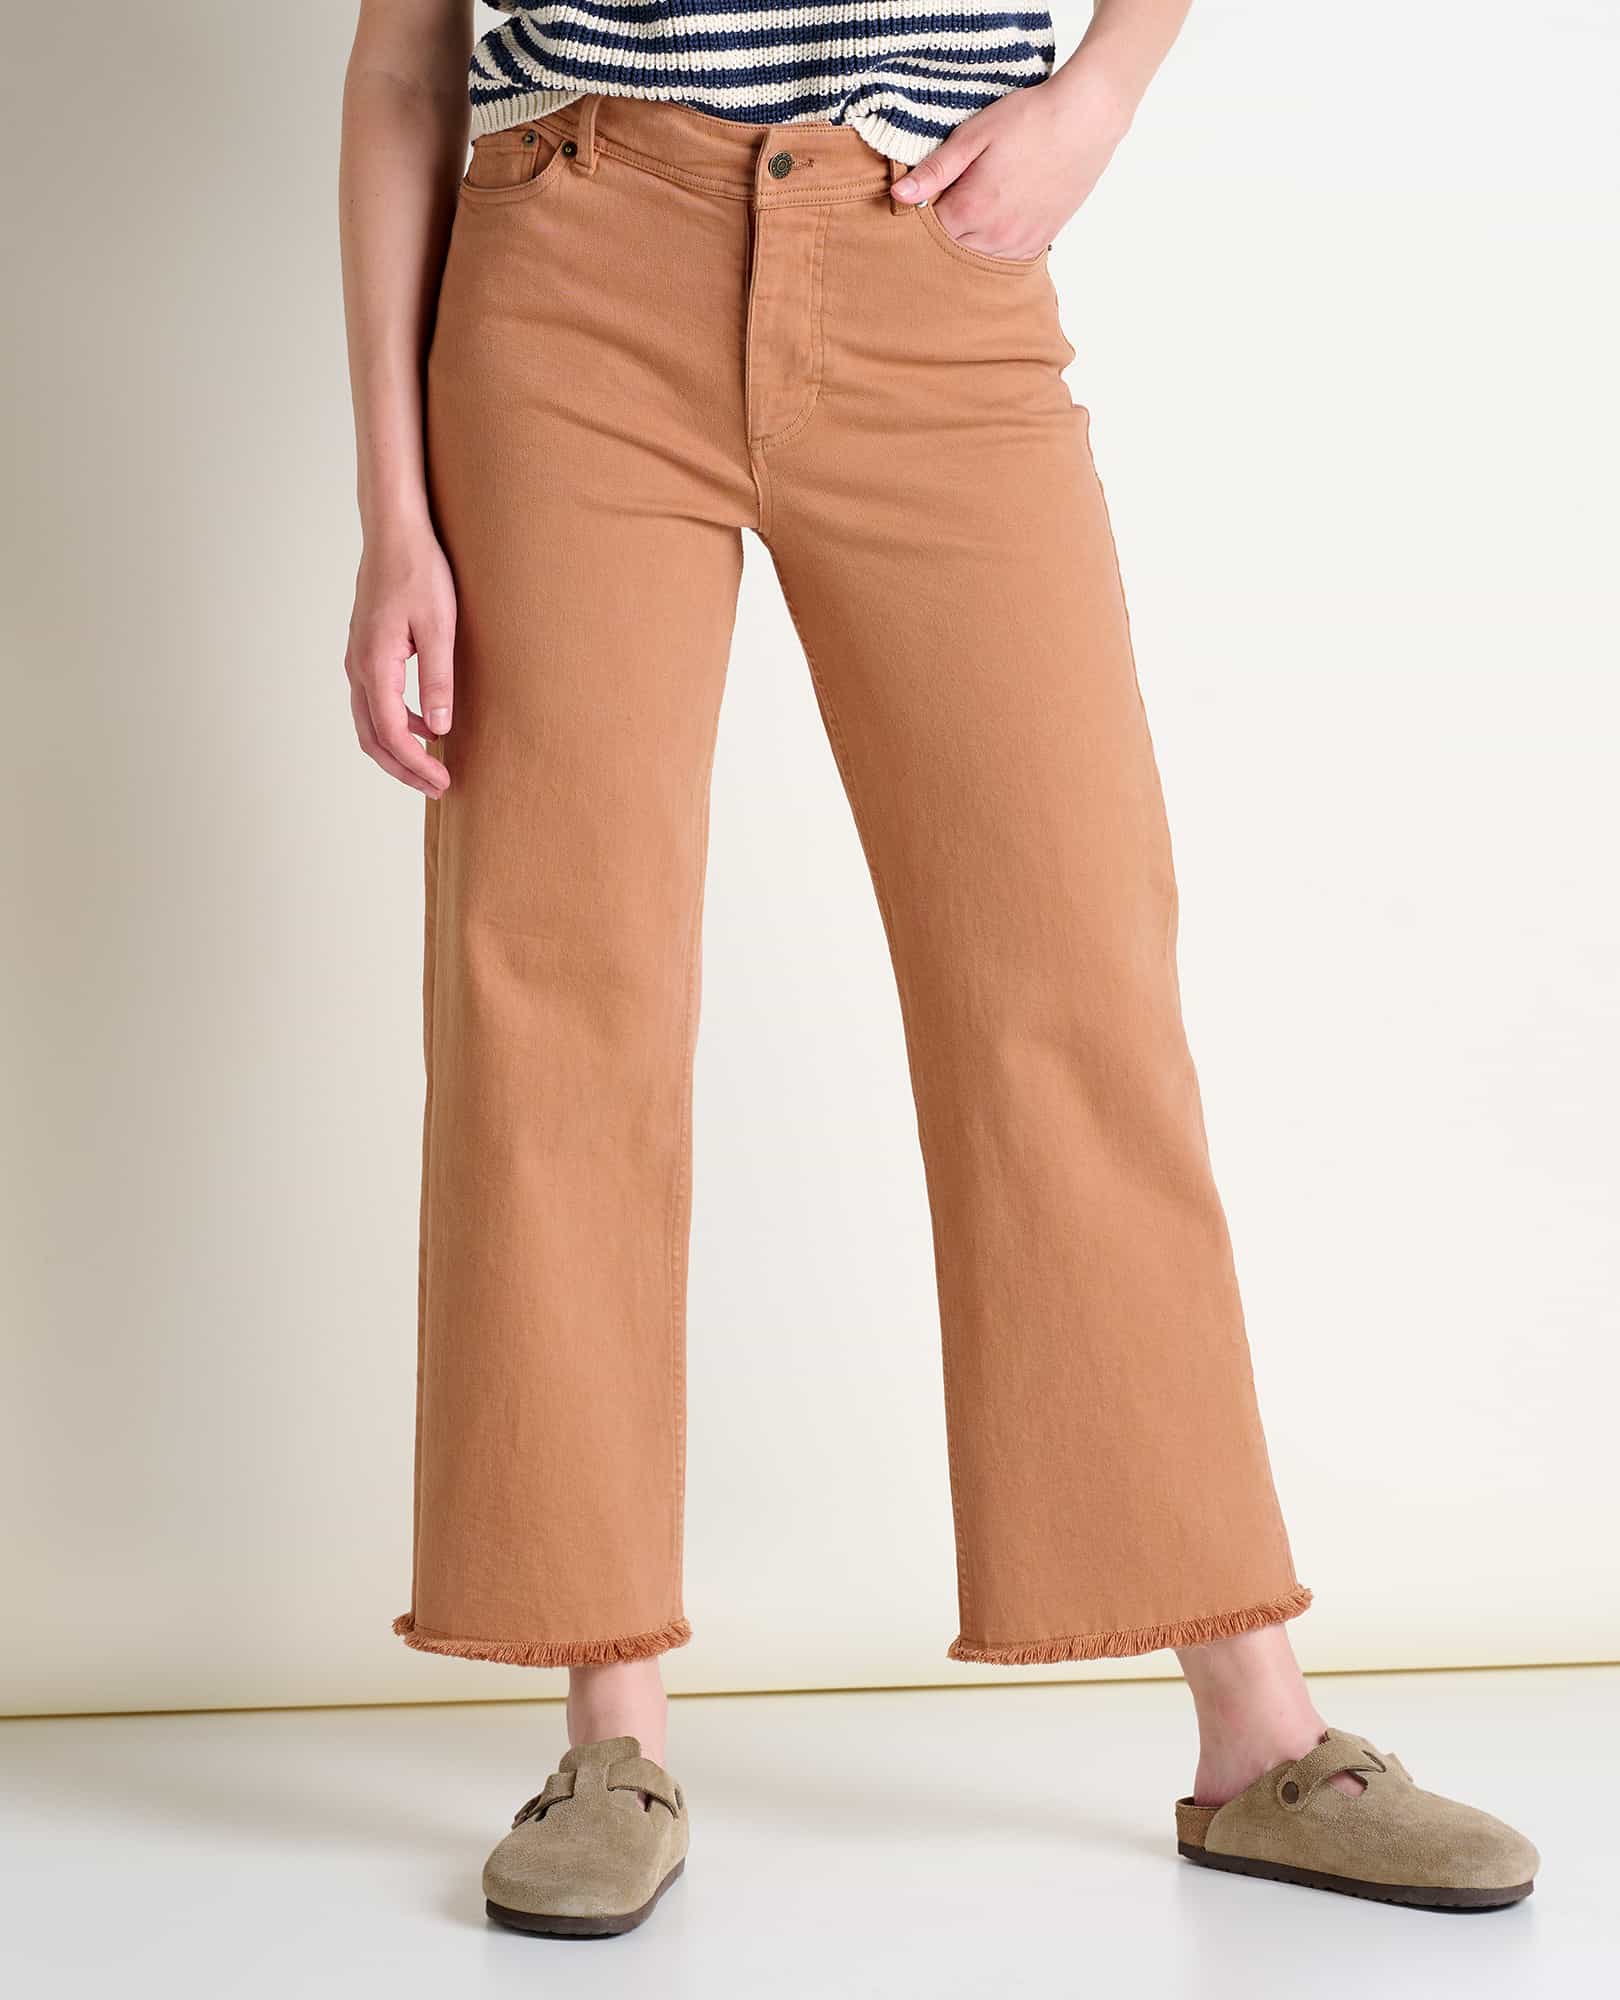 Kick Stretch-Cotton Long Pants in Red (Sold Out)